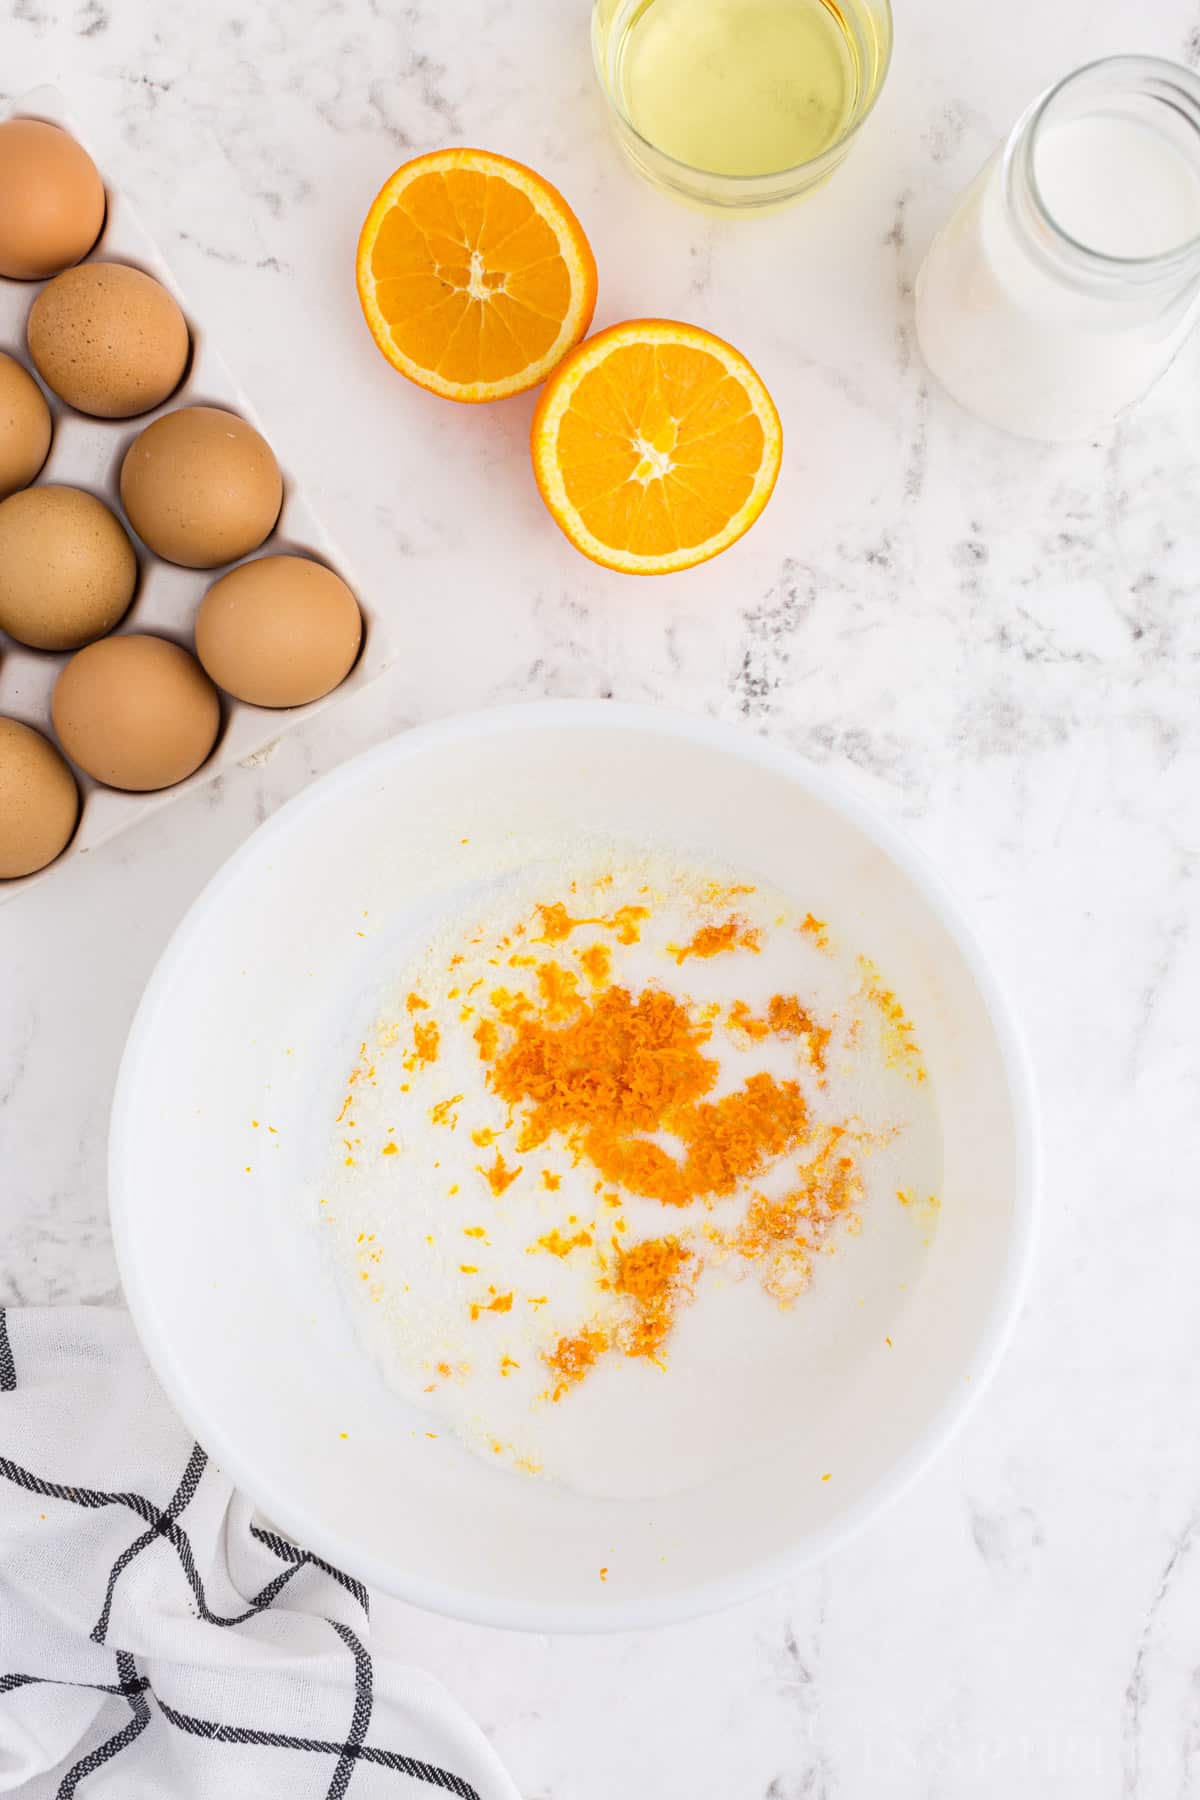 Large mixing bowl with granulated sugar and orange zest, fresh ingredients on a marble countertop.